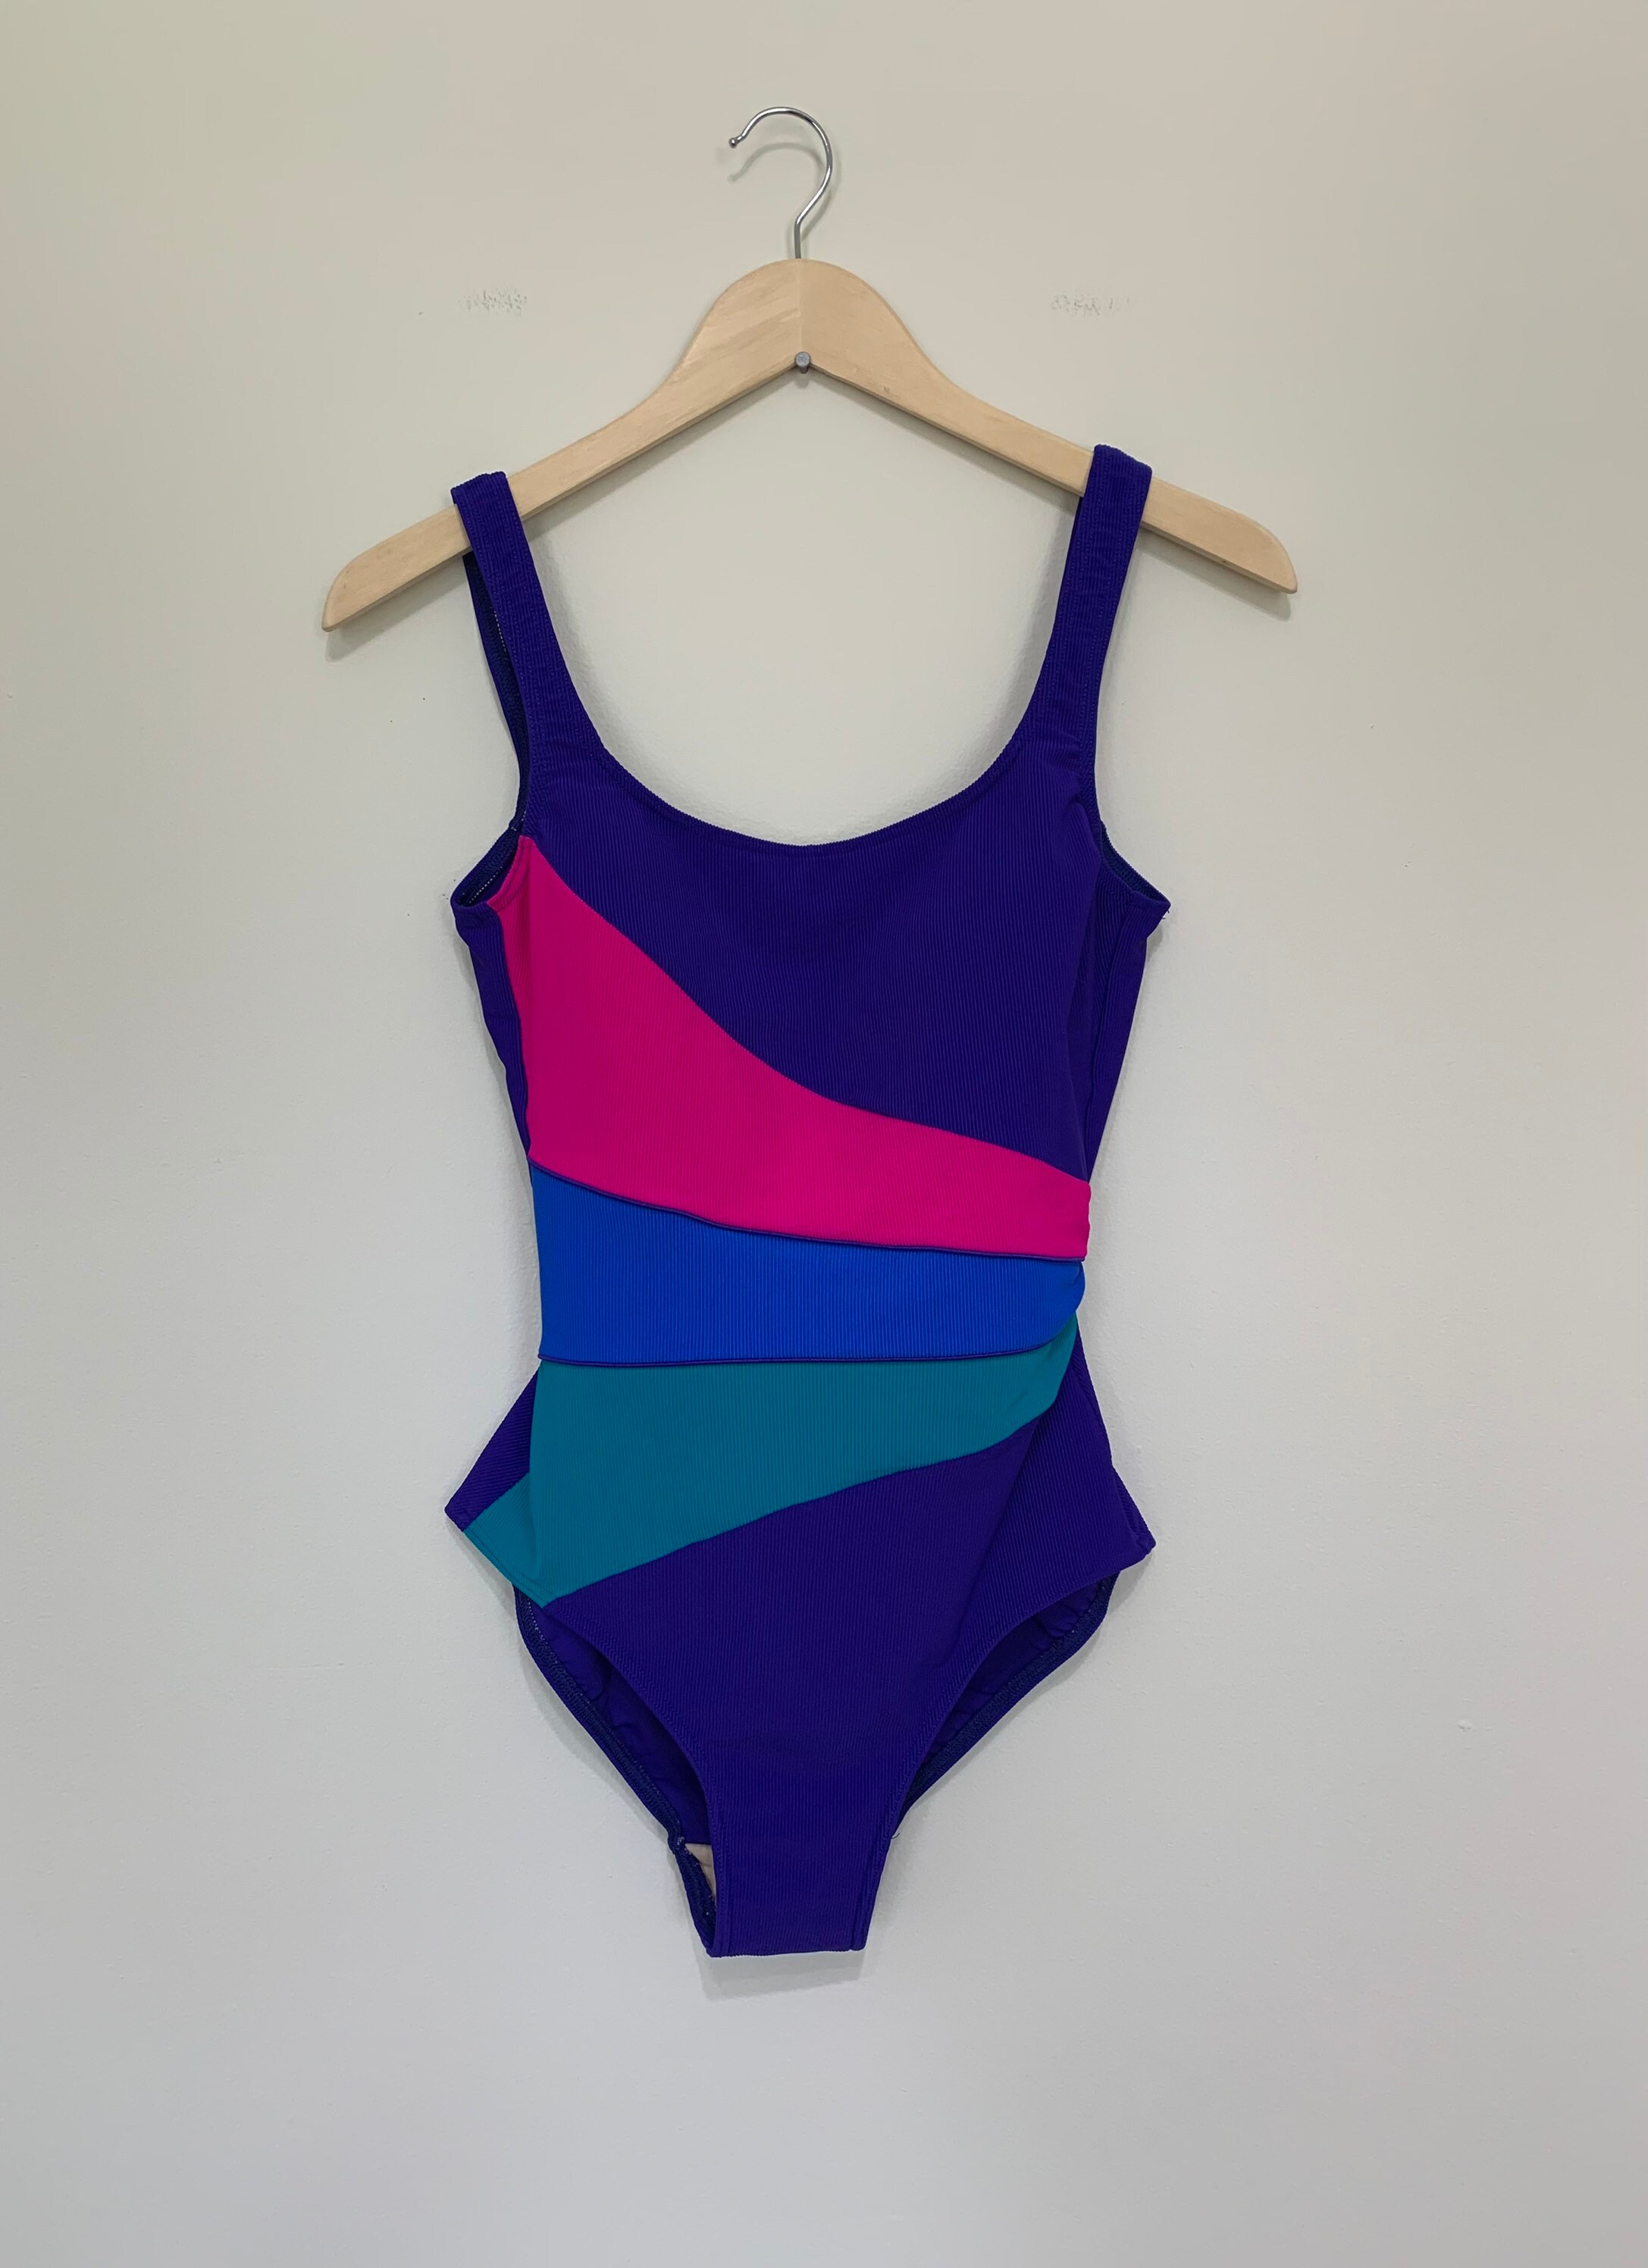 90s High Cut Swimsuit One Piece High Thigh / 90s Swimsuit / | Etsy